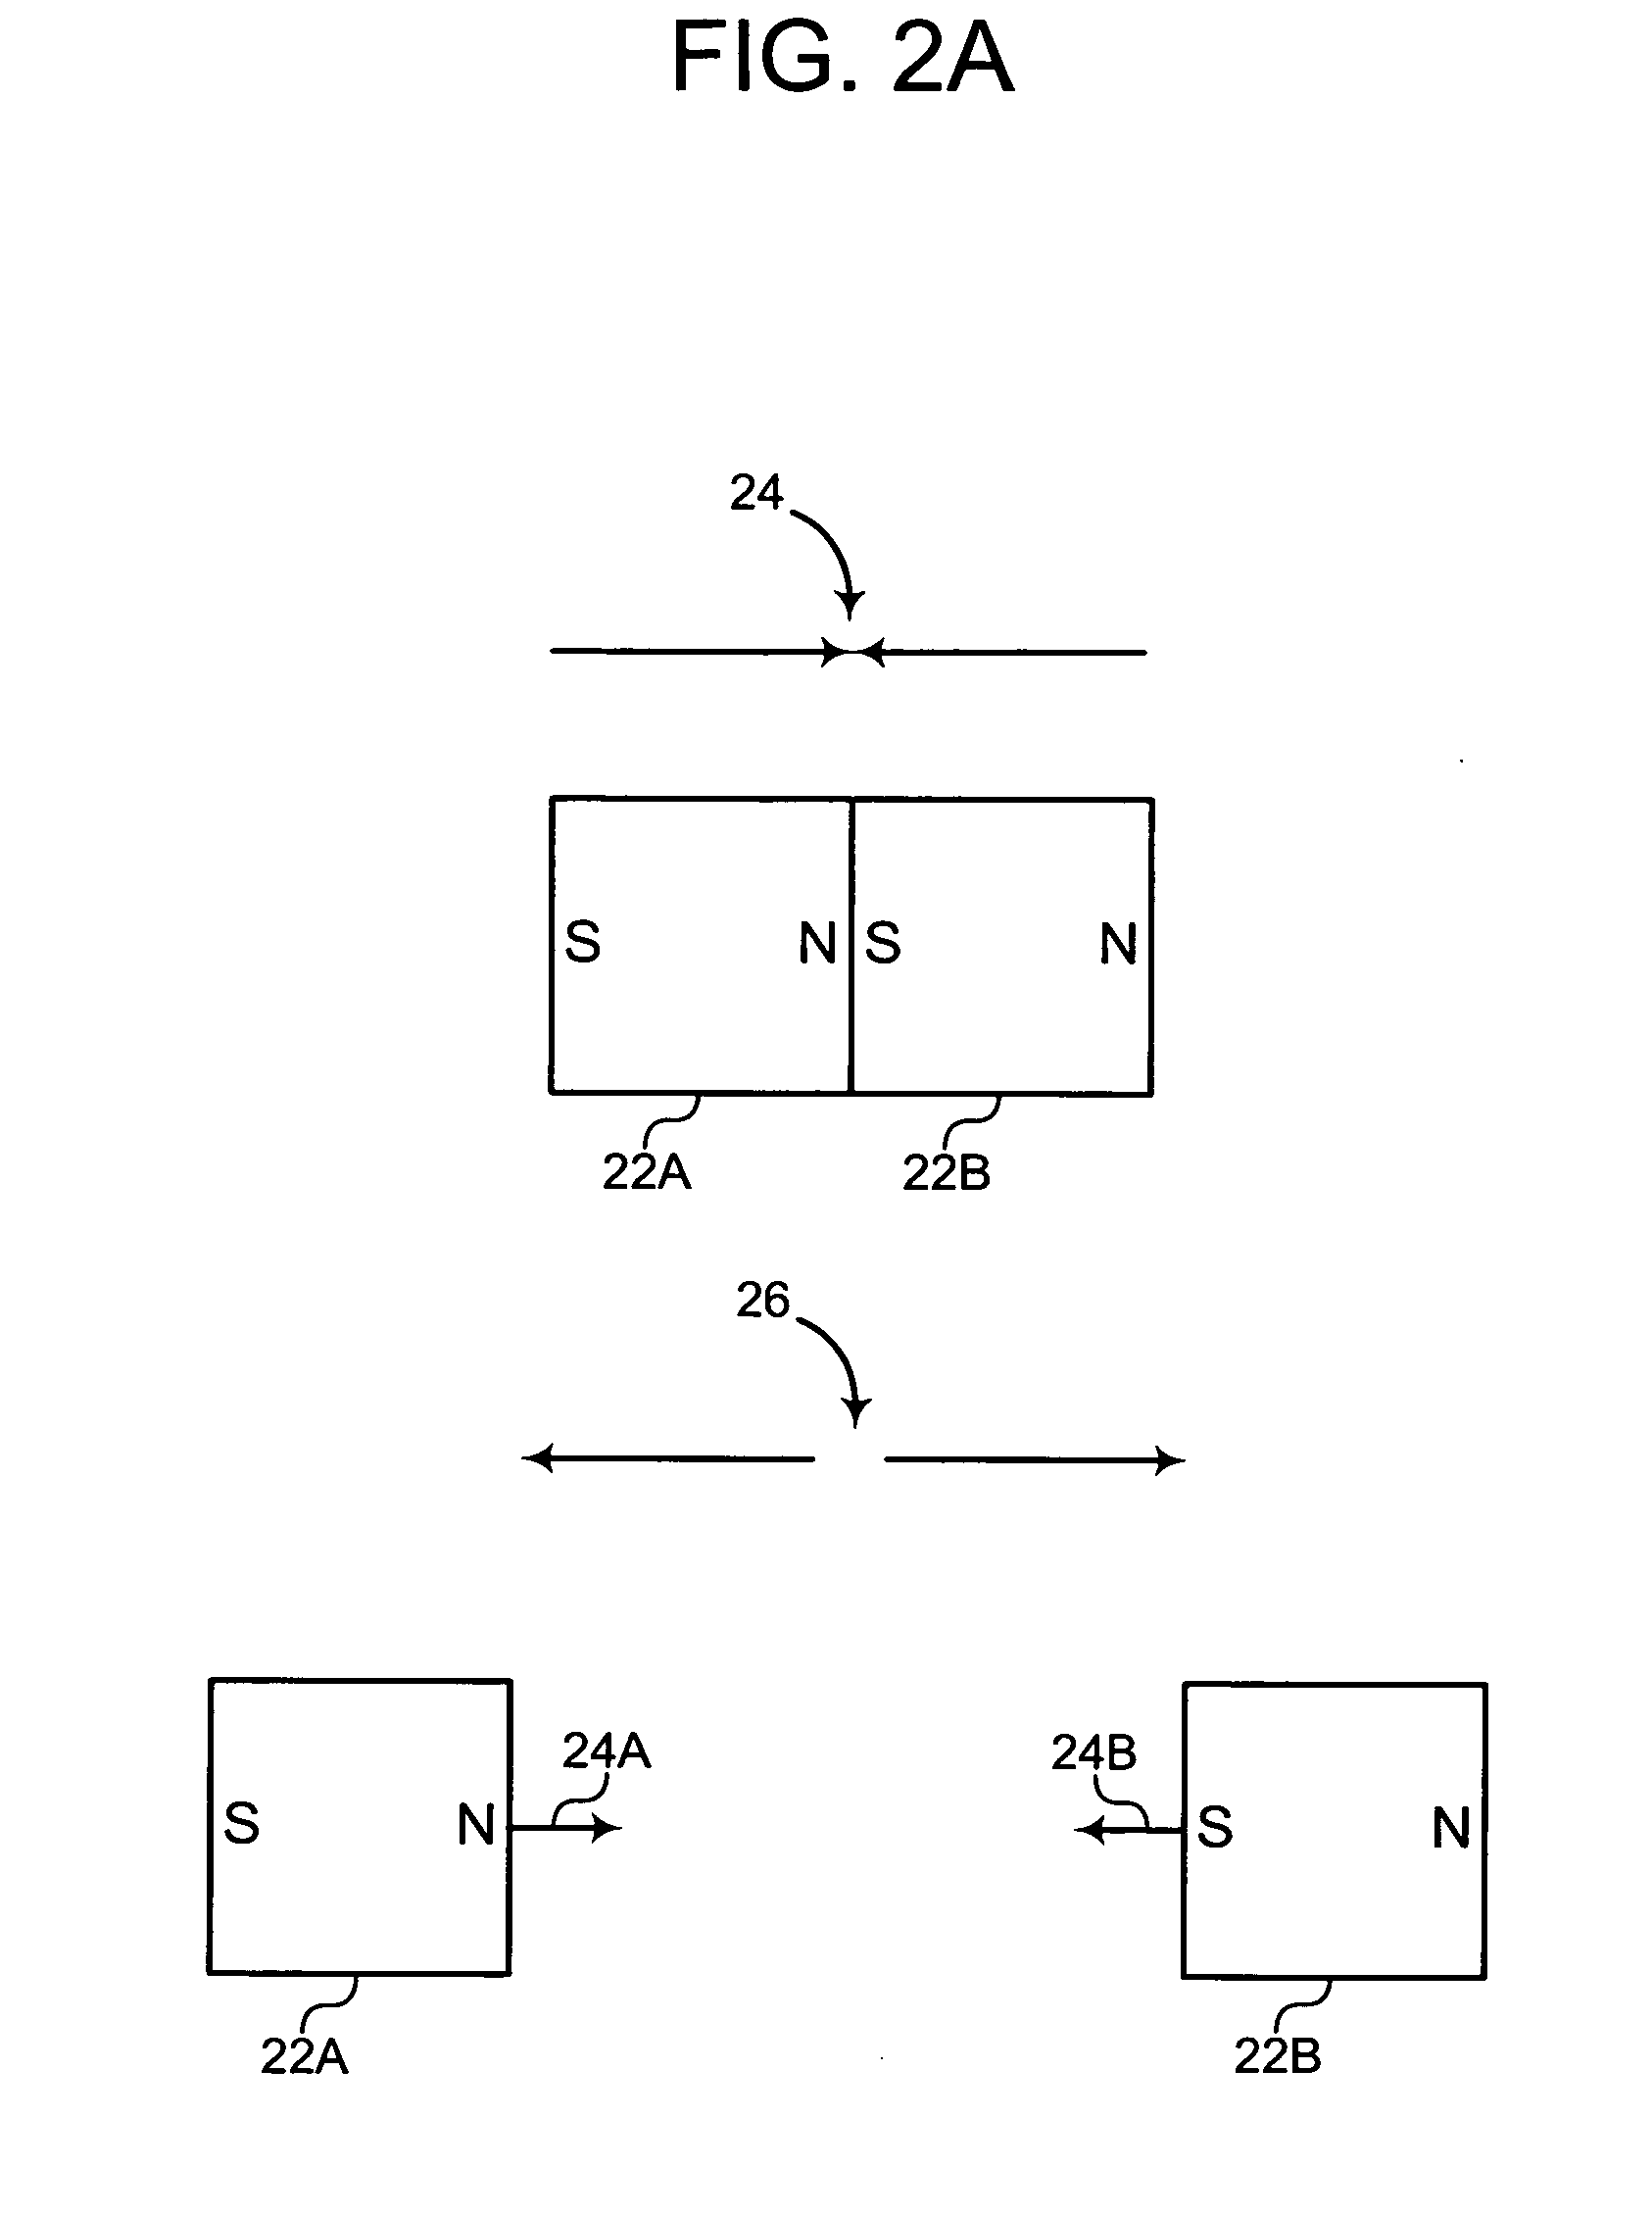 Magnetic torque-limiting device and method